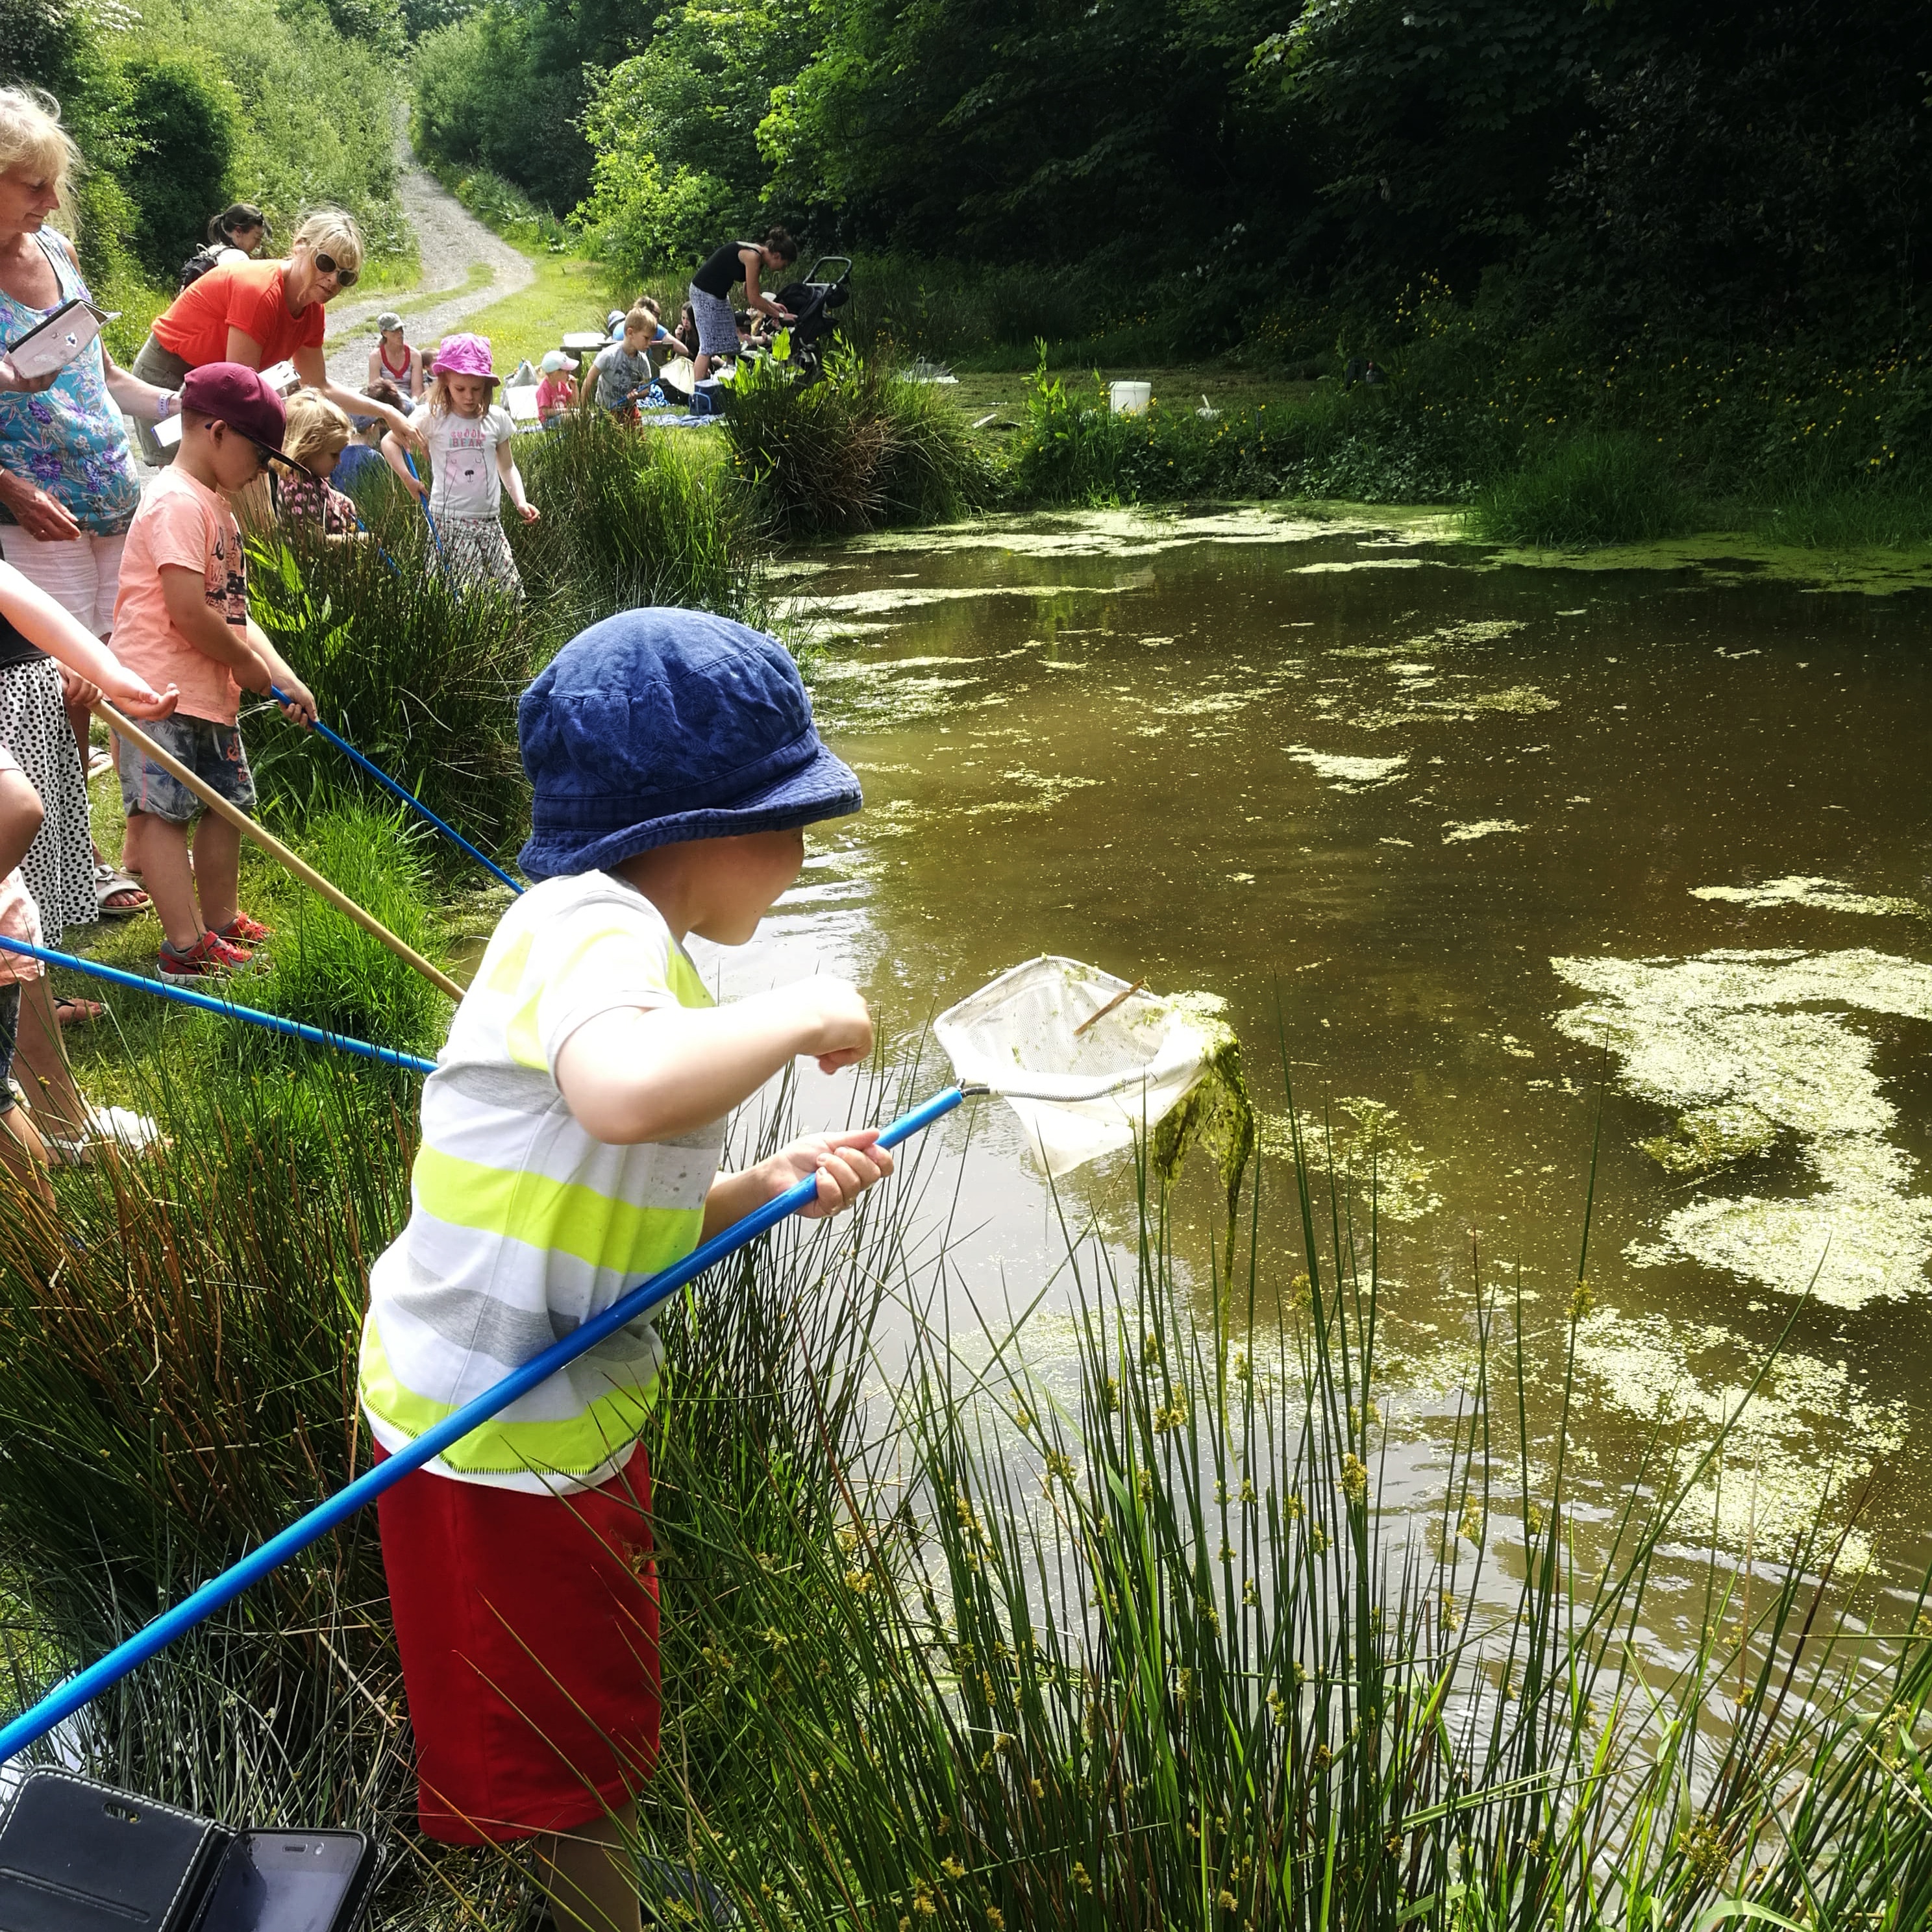 Westland Countryside Stewards Pond Dipping Event Lower Pond on Kilkhampton Common. Numerous families lining the pond with children dipping nets into the water